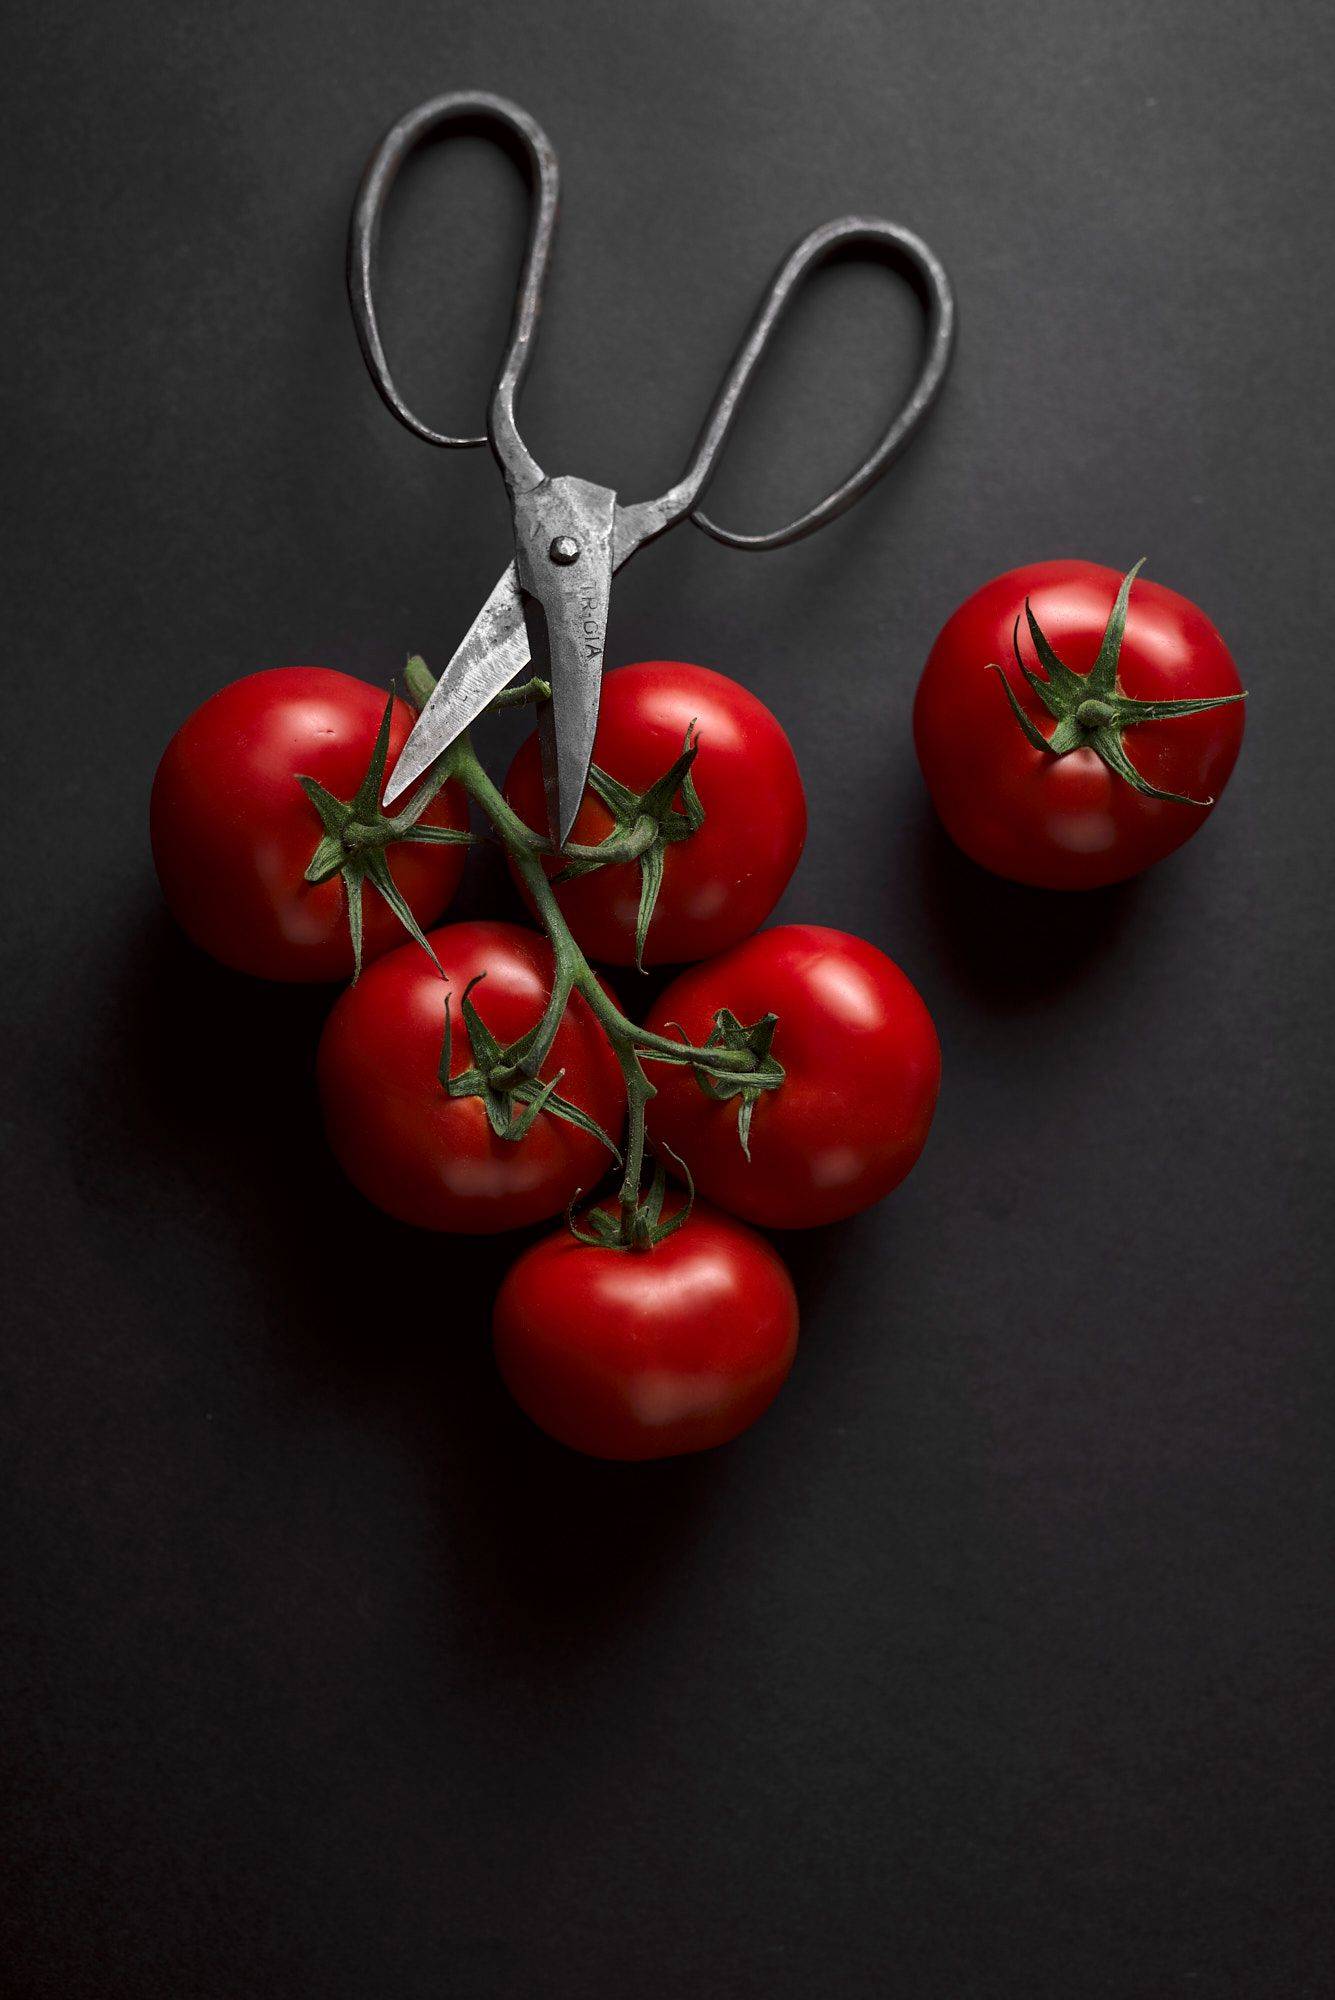 six ripe red tomatoes with vintage scissors on black background